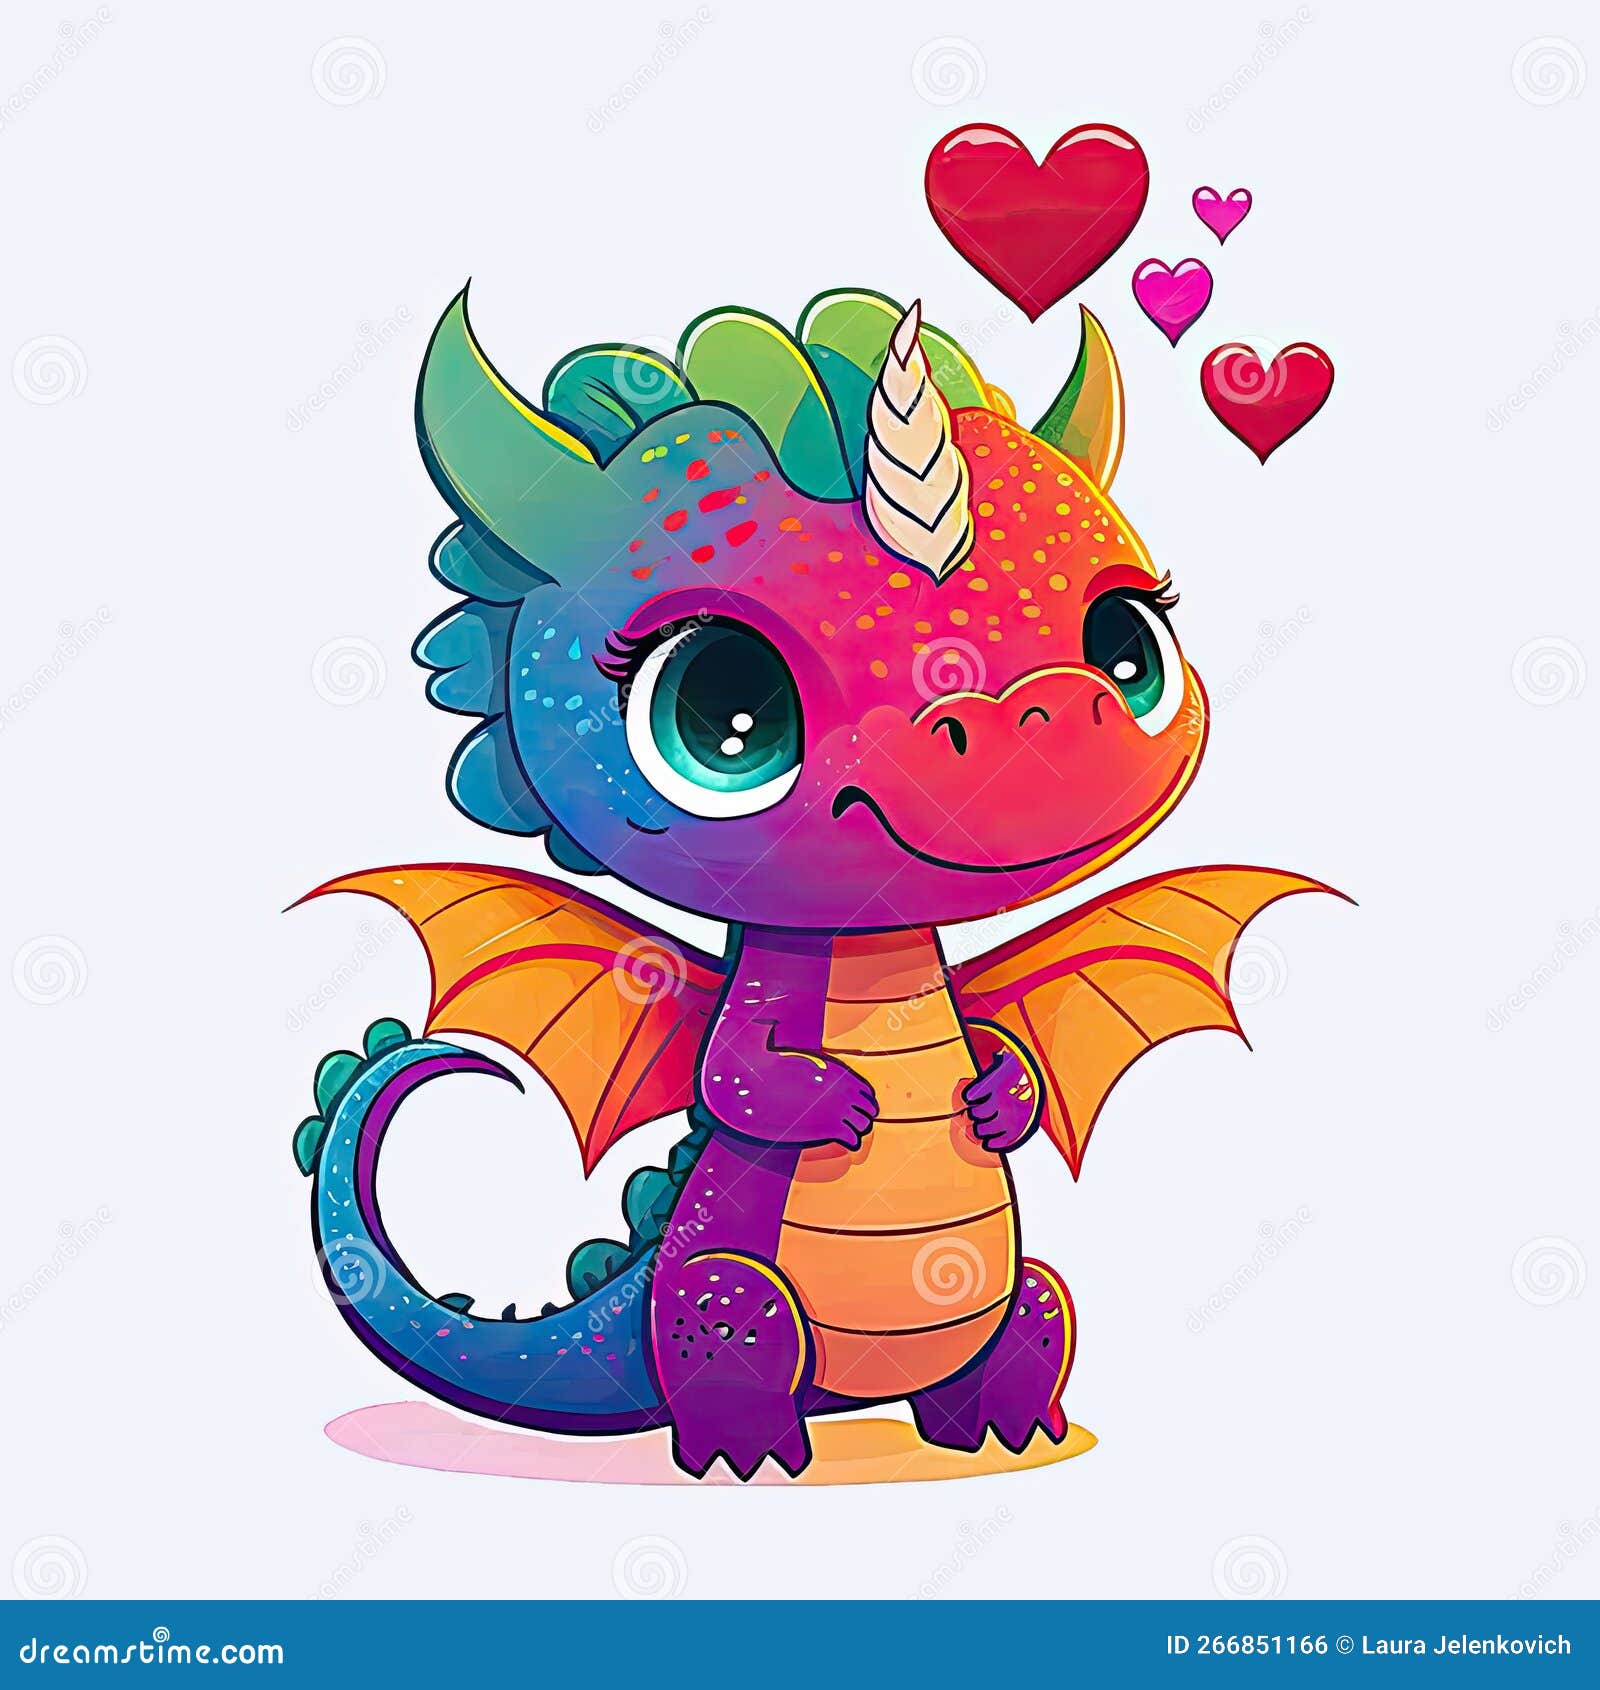 A Cute Rainbow Chibi Dragon And Hearts Stock Illustration Illustration Of Poster Pink